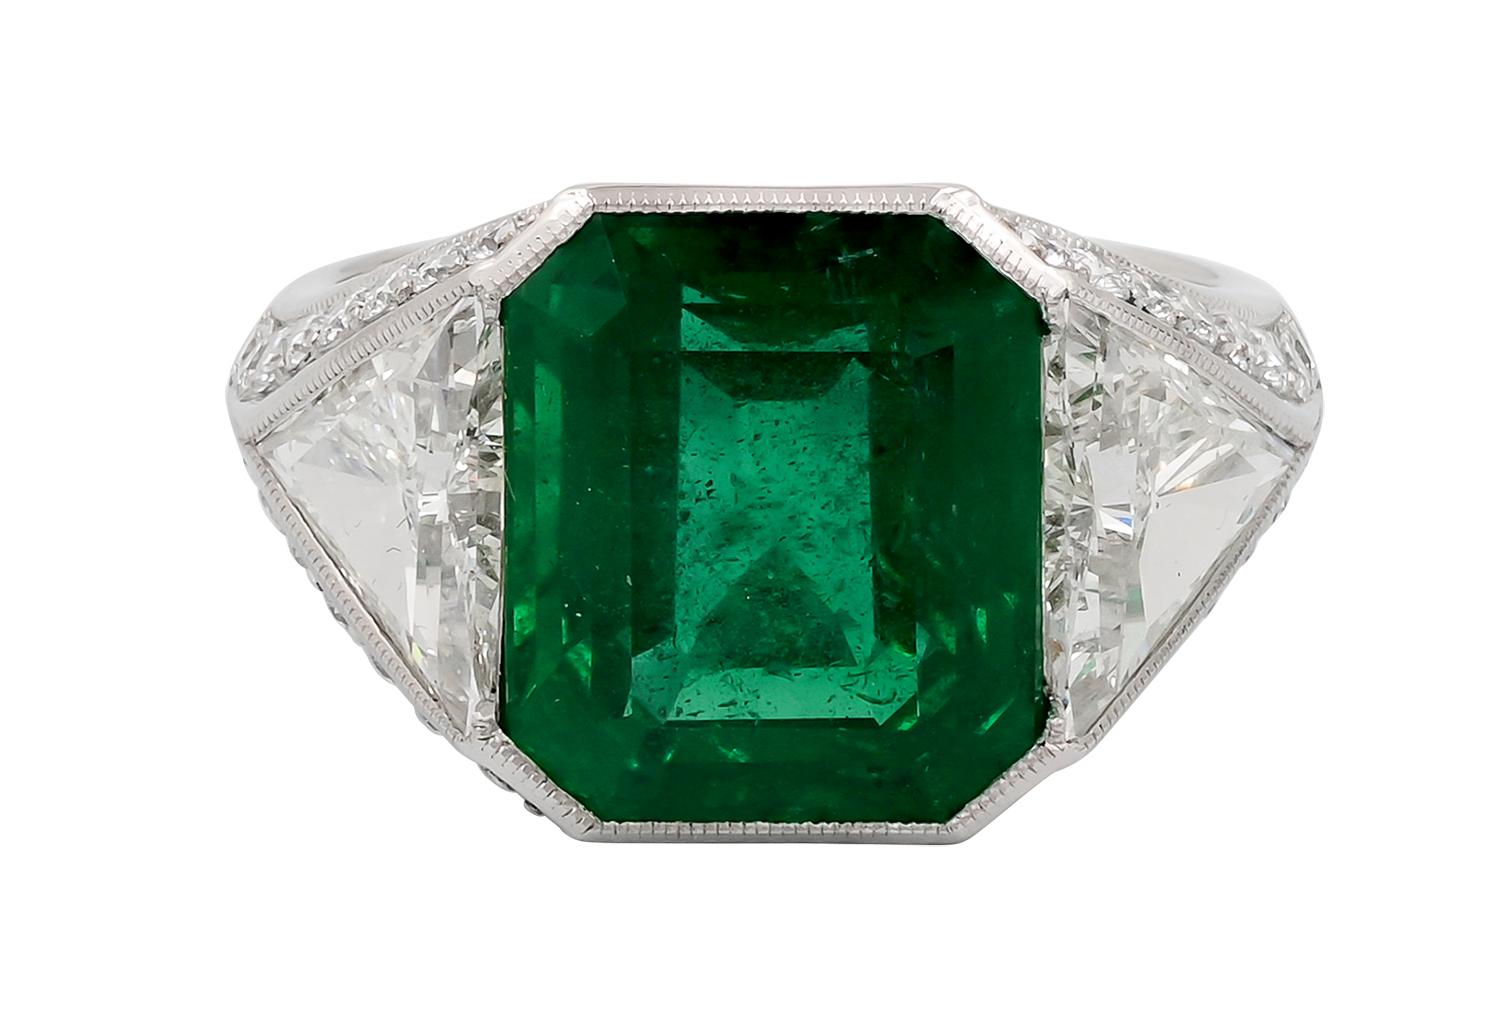 Sophia D 5.80 Carat Emerald Platinum Ring Flanked with 1.67 Carat Diamonds and 0.47 Carat Small Diamonds.

The size is a 6.5 and available for resizing.

Sophia D by Joseph Dardashti LTD has been known worldwide for 35 years and are inspired by